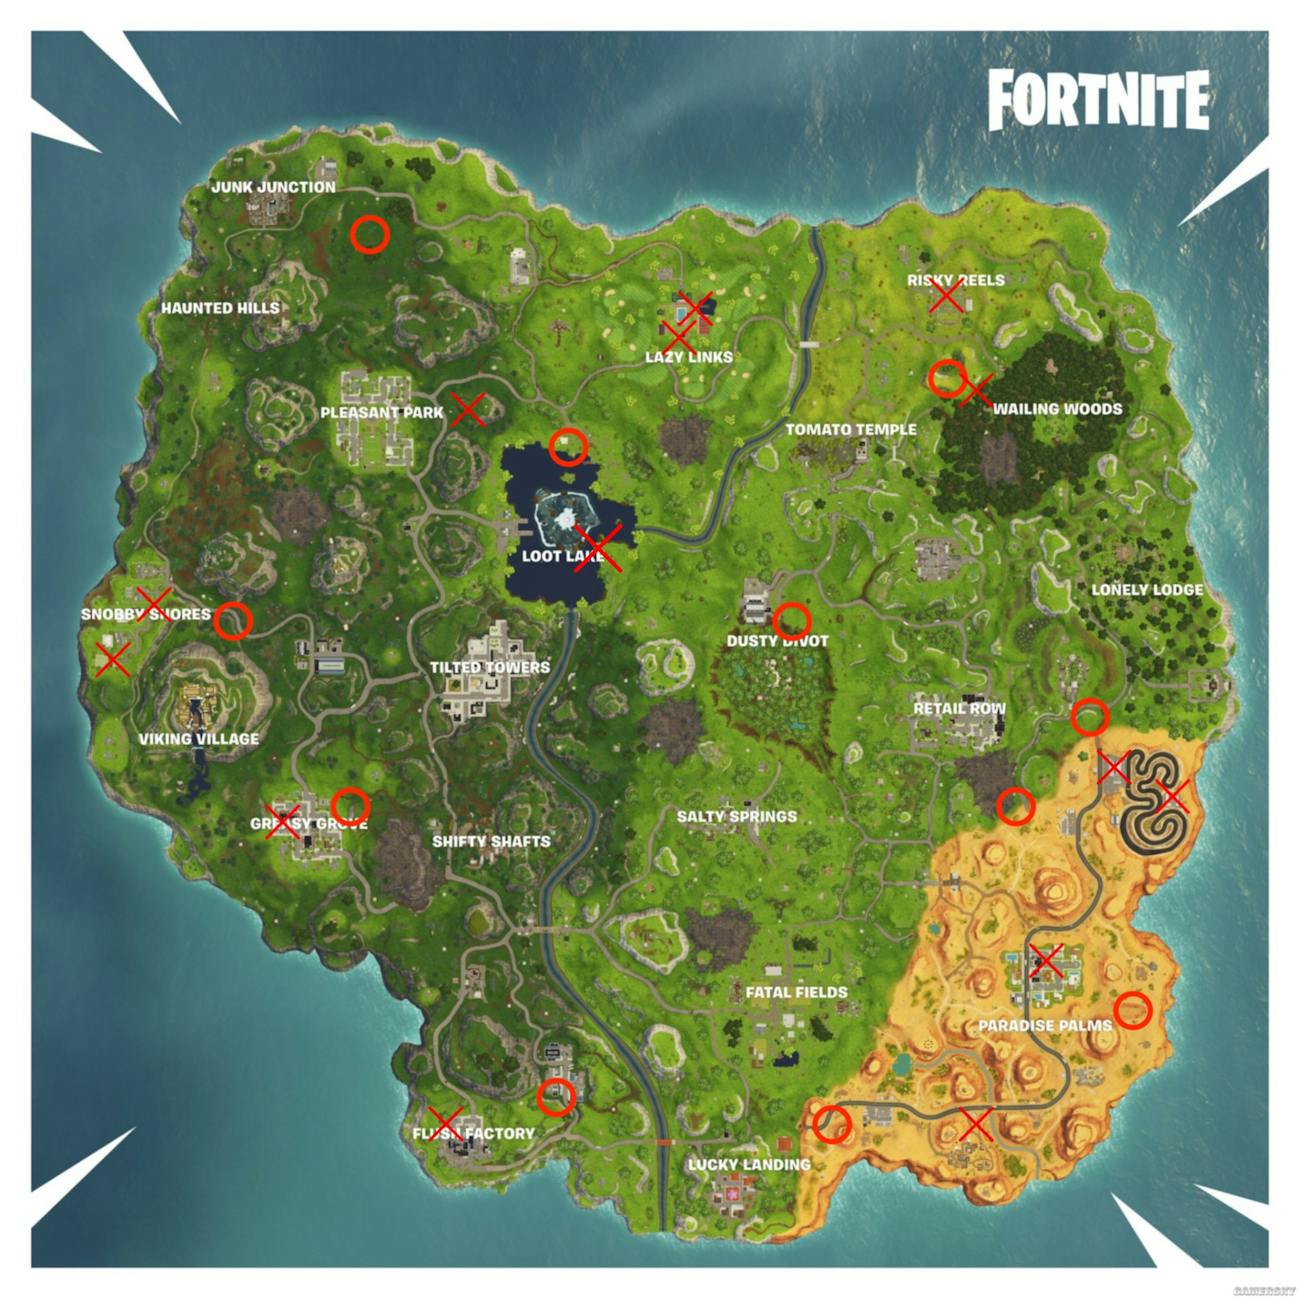 fortnite flaming hoop atk and quadcrasher - location of flaming hoops in fortnite